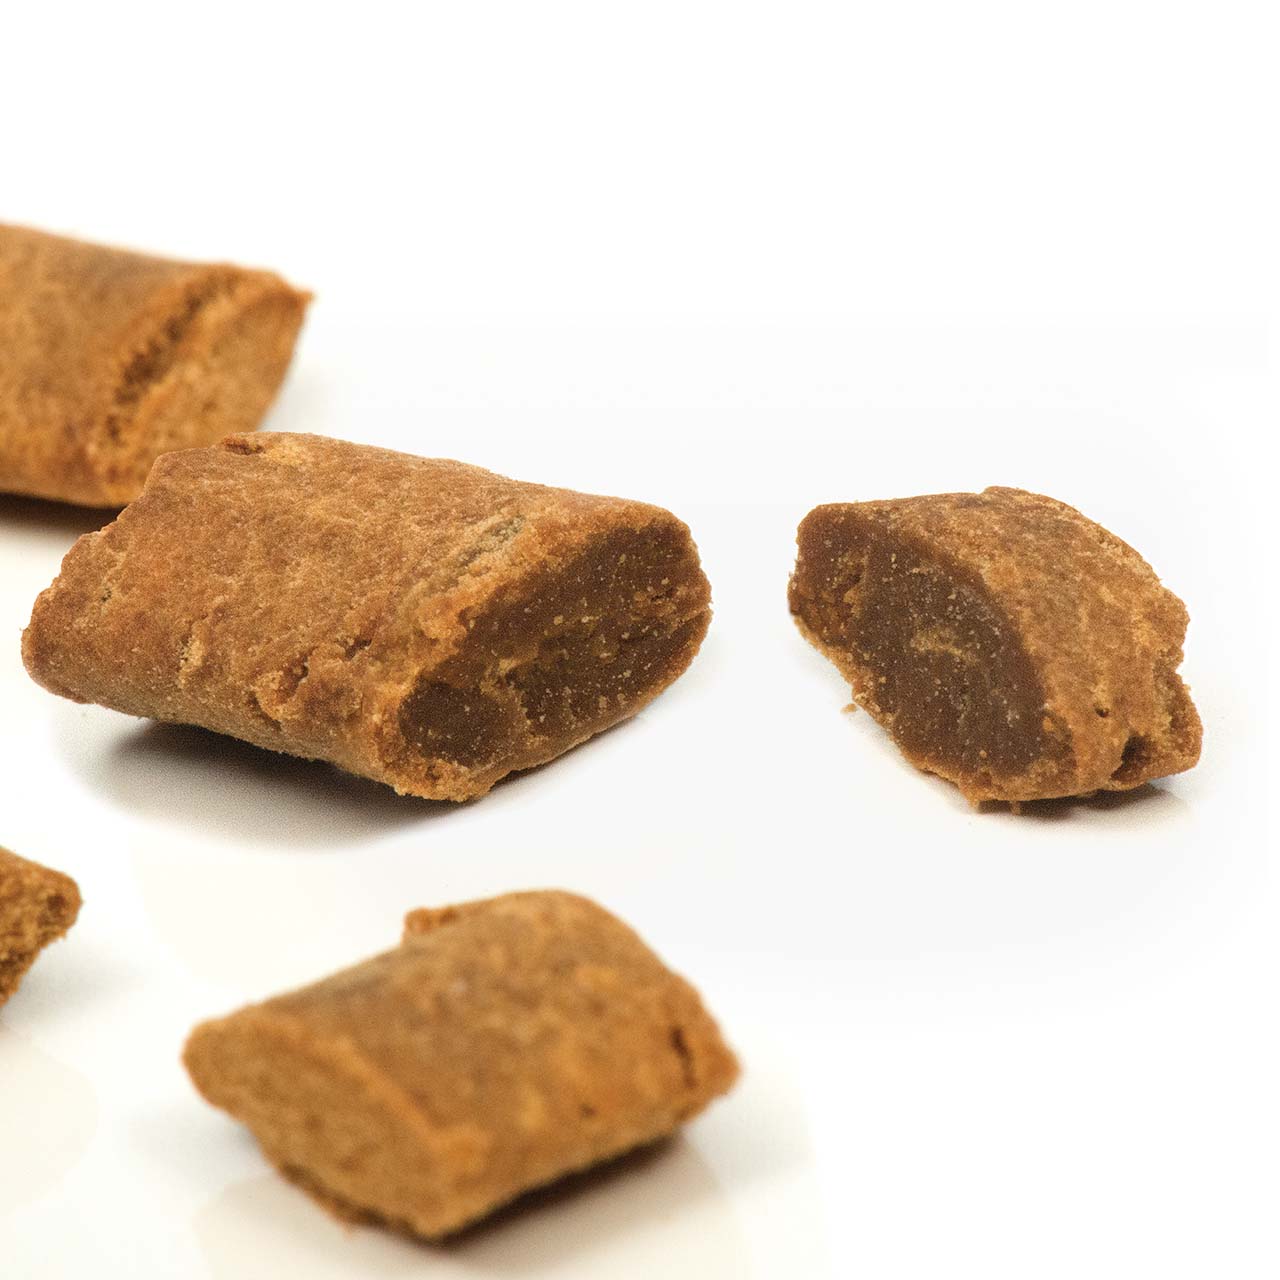 Crunchy cat snacks fortified with taurine